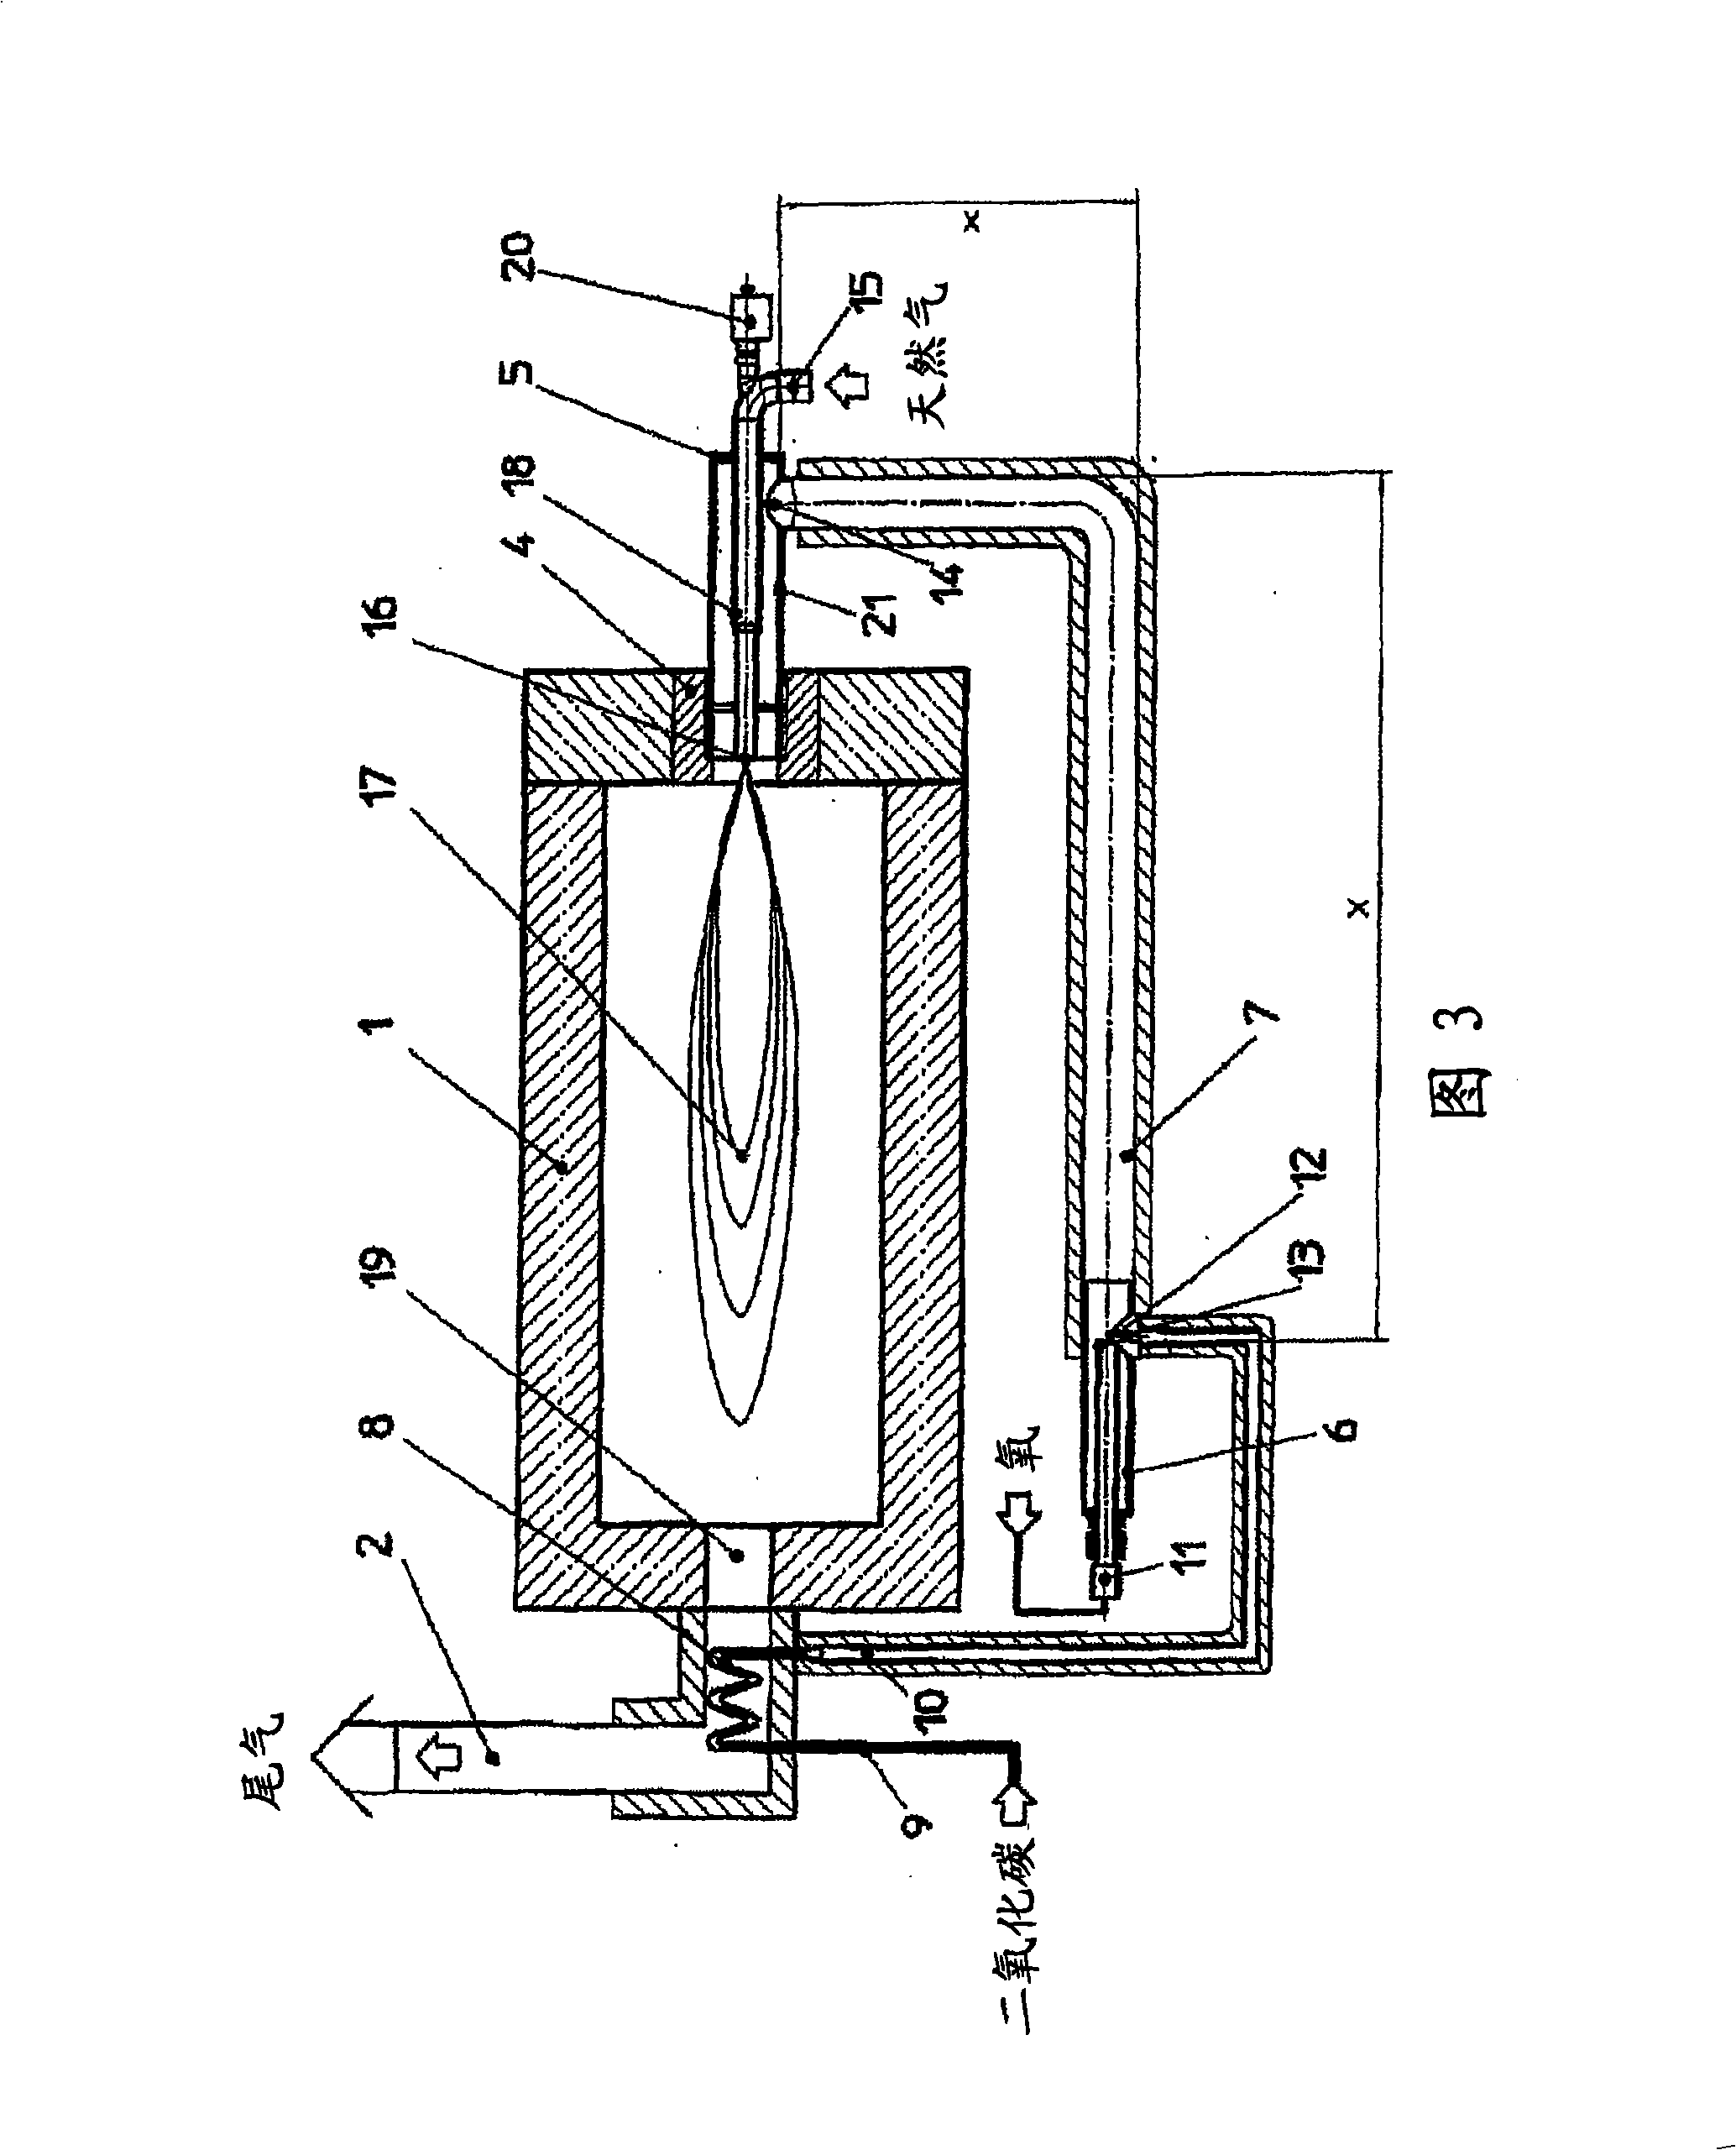 Low-nitrogen oxide combustion technique and device